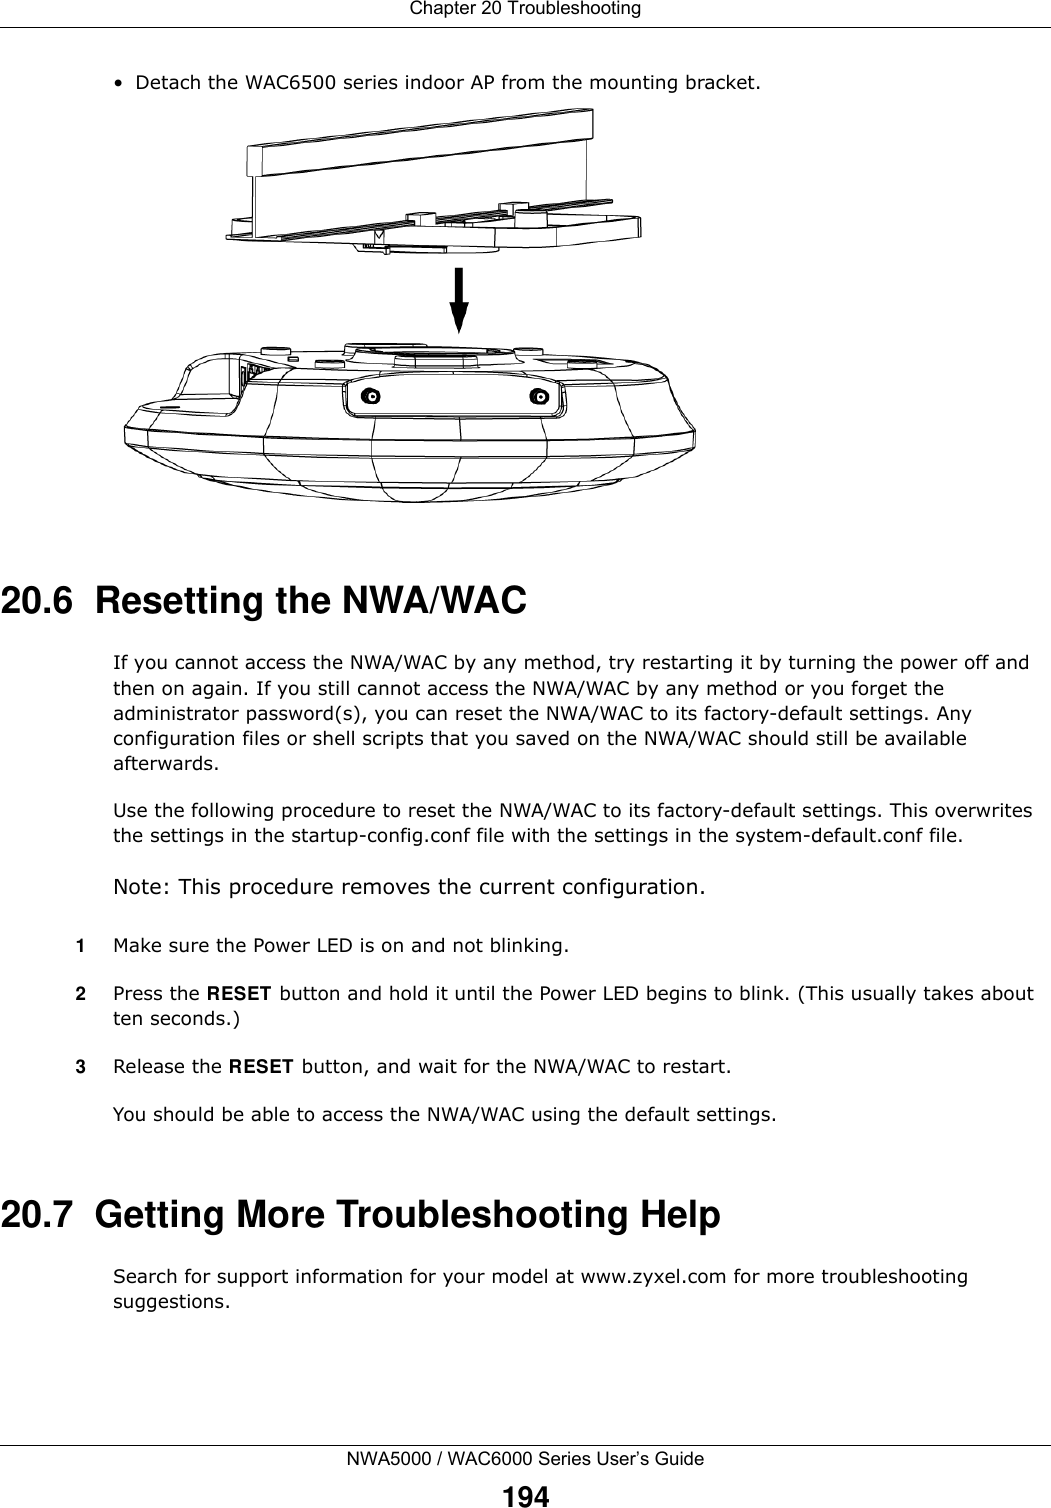 Chapter 20 TroubleshootingNWA5000 / WAC6000 Series User’s Guide194• Detach the WAC6500 series indoor AP from the mounting bracket.20.6  Resetting the NWA/WACIf you cannot access the NWA/WAC by any method, try restarting it by turning the power off and then on again. If you still cannot access the NWA/WAC by any method or you forget the administrator password(s), you can reset the NWA/WAC to its factory-default settings. Any configuration files or shell scripts that you saved on the NWA/WAC should still be available afterwards.Use the following procedure to reset the NWA/WAC to its factory-default settings. This overwrites the settings in the startup-config.conf file with the settings in the system-default.conf file. Note: This procedure removes the current configuration. 1Make sure the Power LED is on and not blinking.2Press the RESET button and hold it until the Power LED begins to blink. (This usually takes about ten seconds.)3Release the RESET button, and wait for the NWA/WAC to restart.You should be able to access the NWA/WAC using the default settings.20.7  Getting More Troubleshooting HelpSearch for support information for your model at www.zyxel.com for more troubleshooting suggestions.